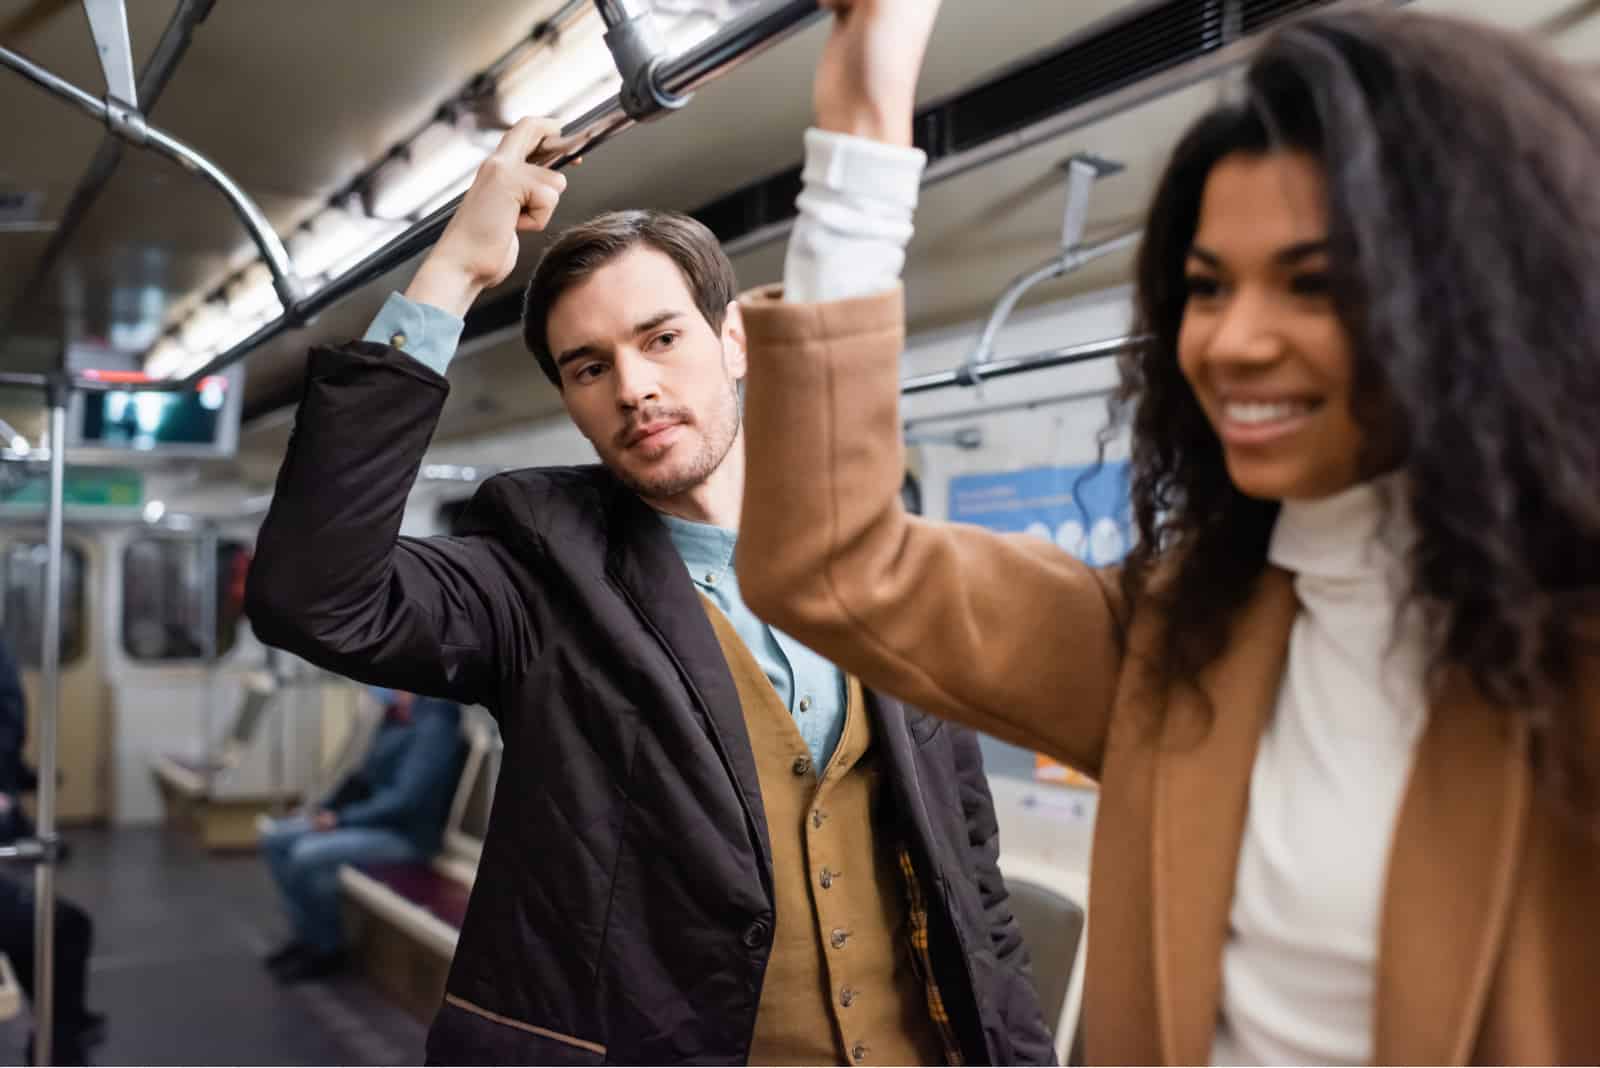 man looking at woman in train